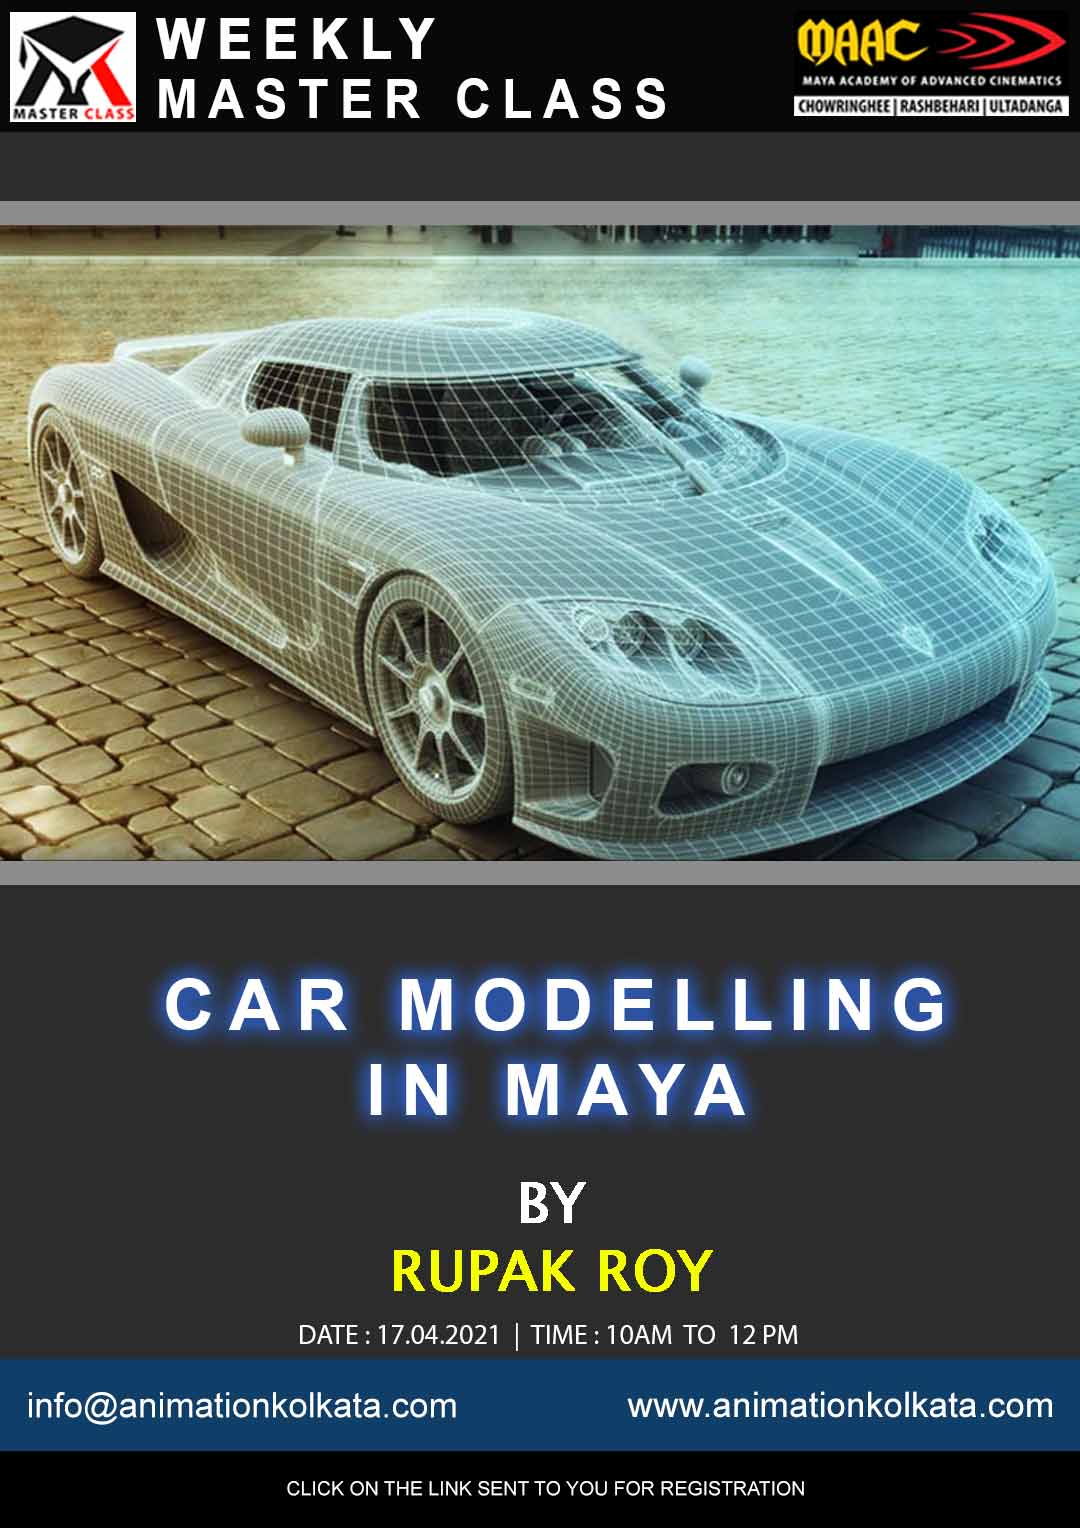 Weekly Master Class on Car Modeling in Maya